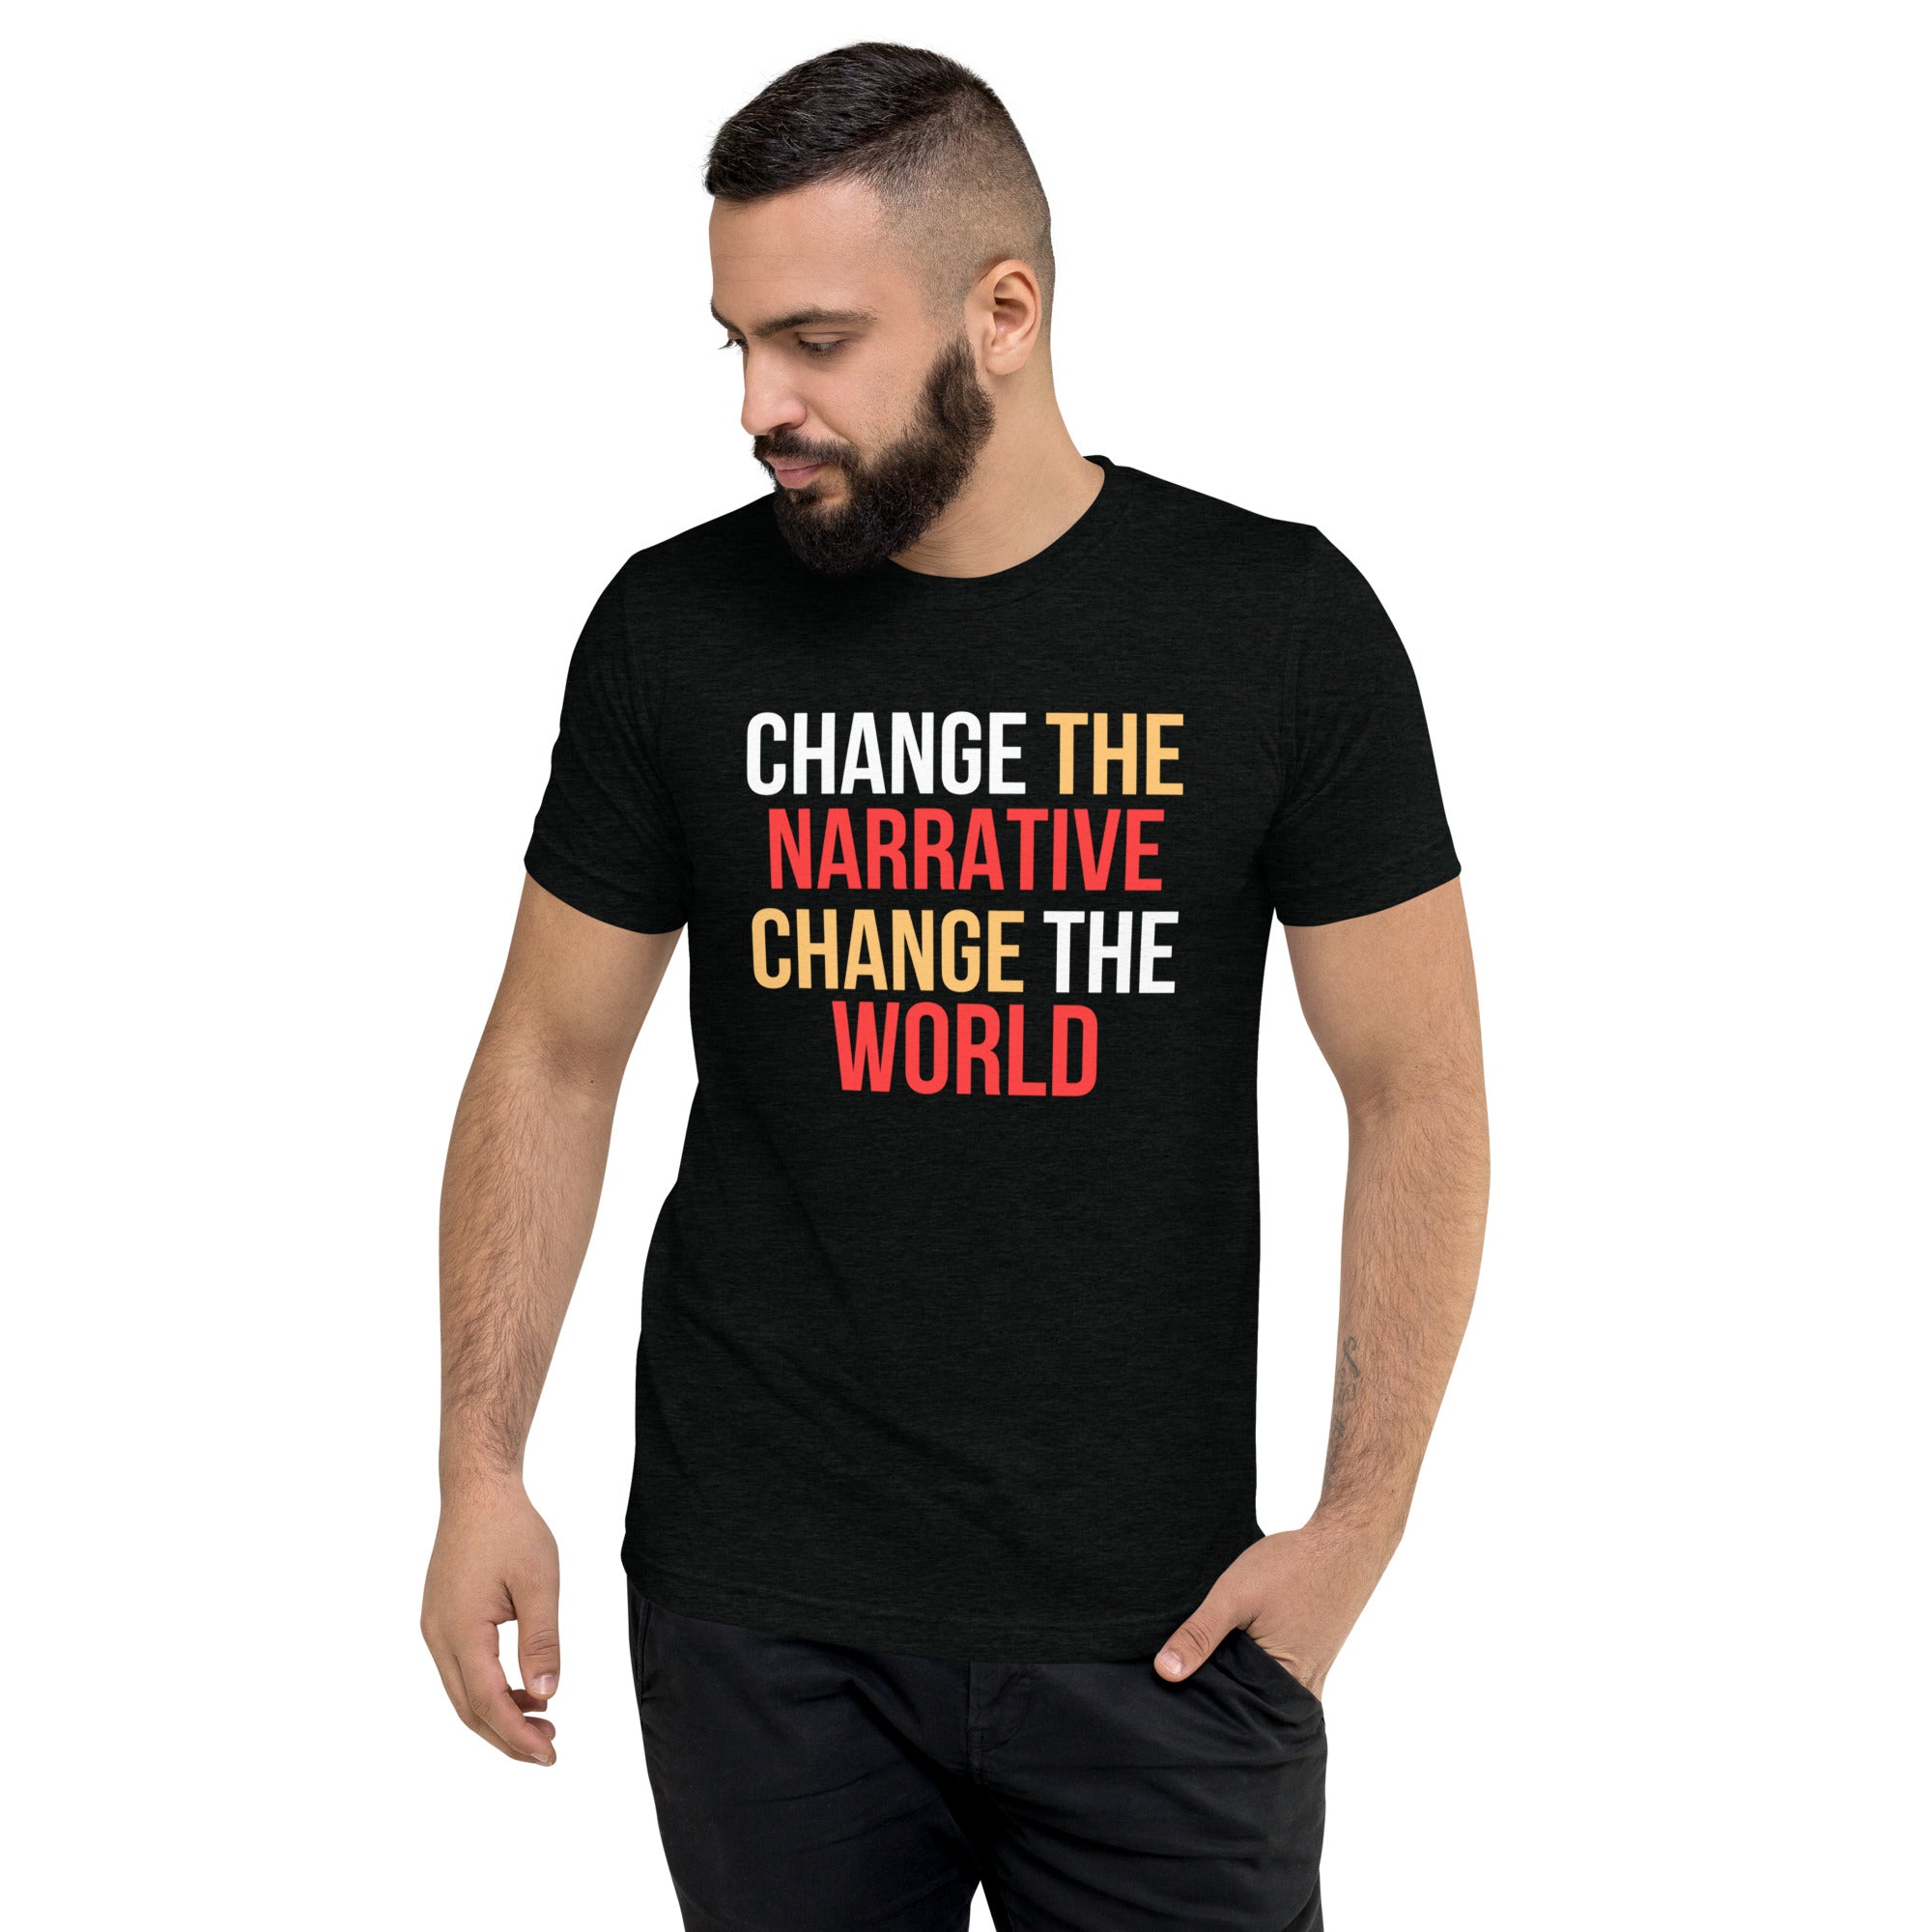 Change the Narrative, Change the World, Terps (#mentalhealth on back)